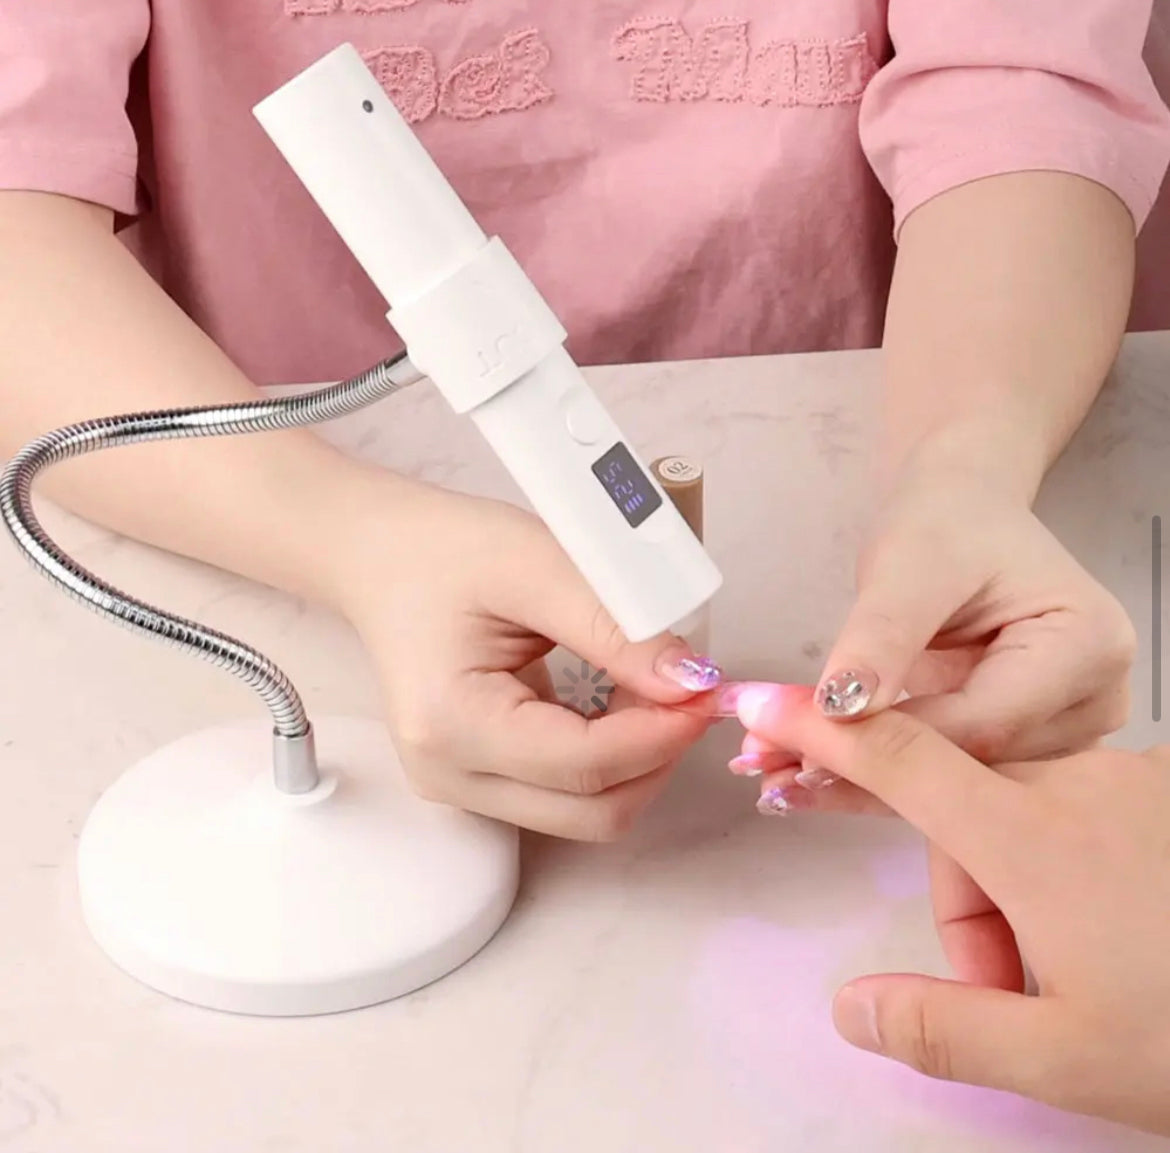 GELLY TIPS TOUCH CURE LED LAMP 9W